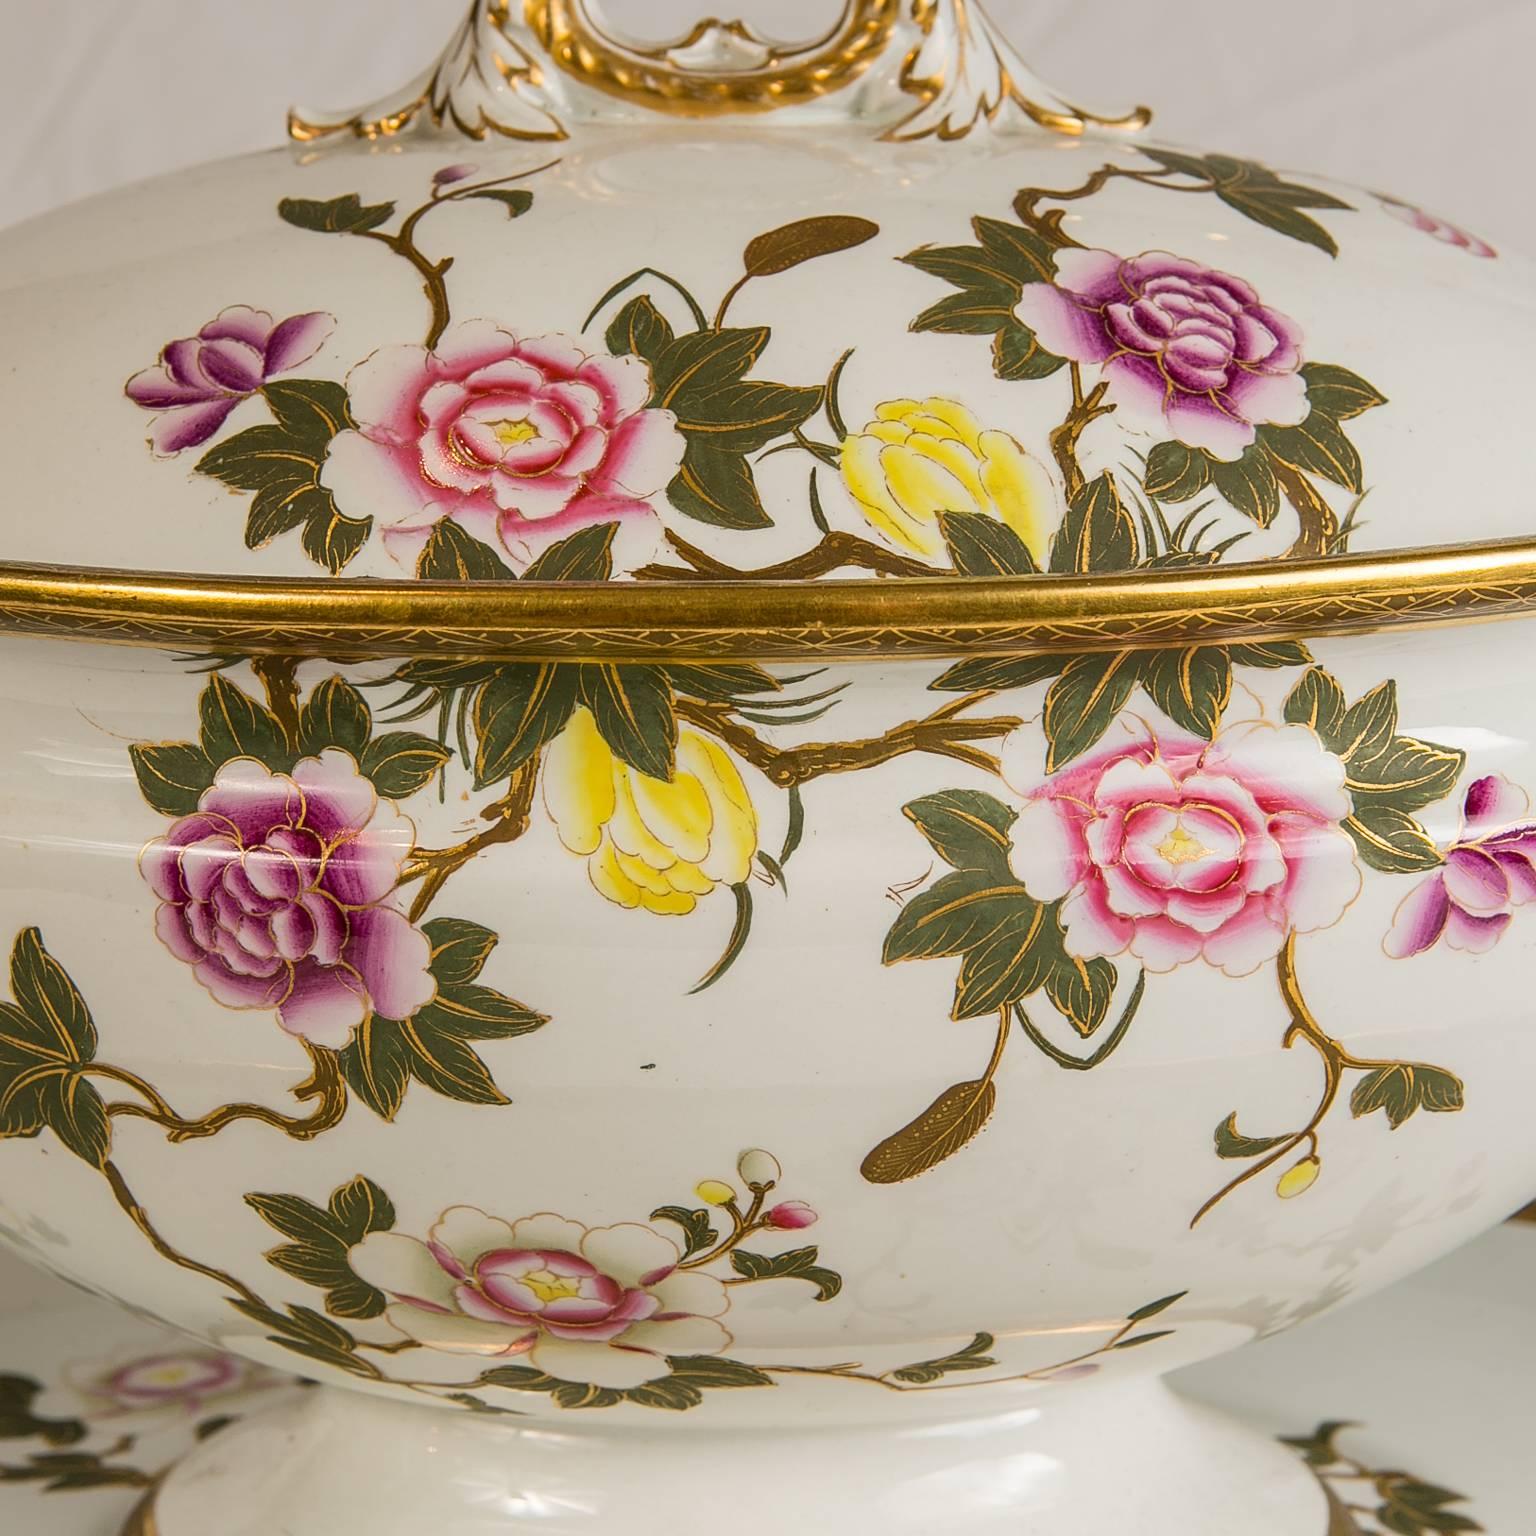 This large Royal Worcester soup tureen and stand is decorated with delicate pink, purple, white, and yellow roses and soft green leaves accented with gold. The finial and handles are made in the shape of branches, adding to the charm of the tureen